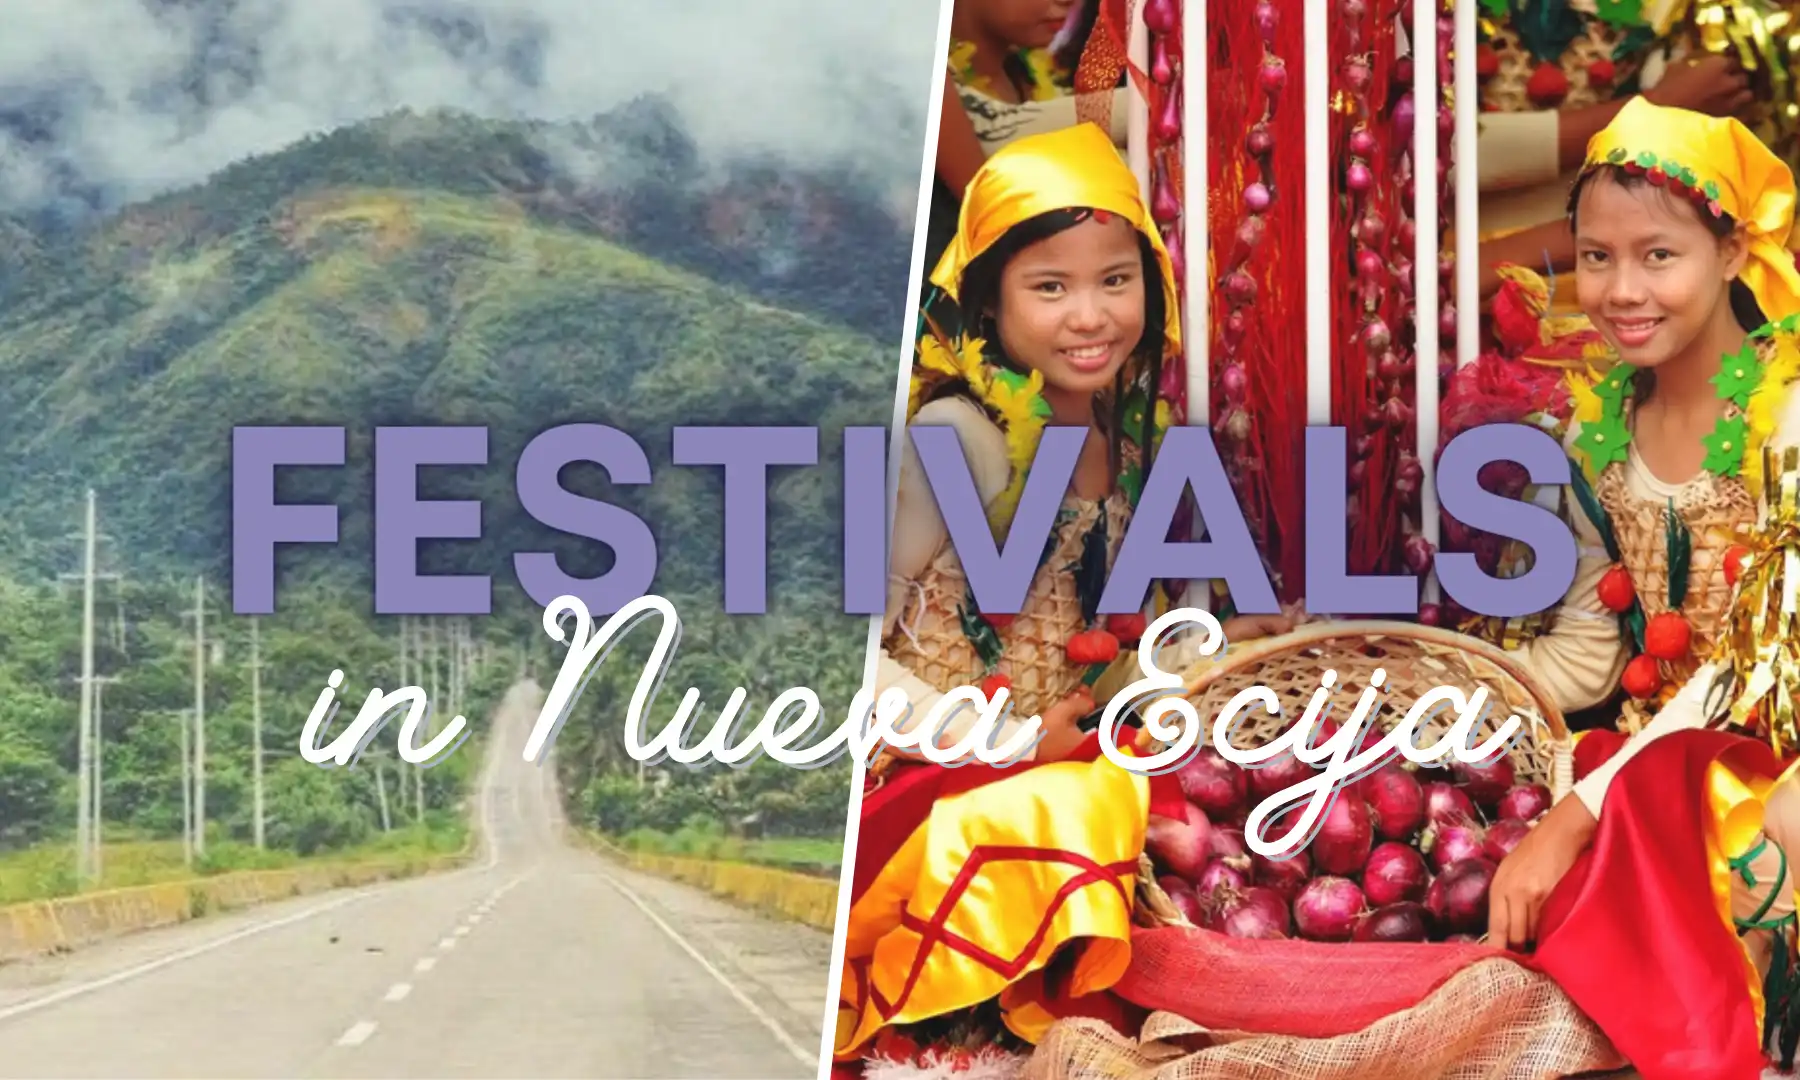 The Colorful And Remarkable Festivals In Nueva Ecija Reflecting Its Diverse Cultural Traditions.webp